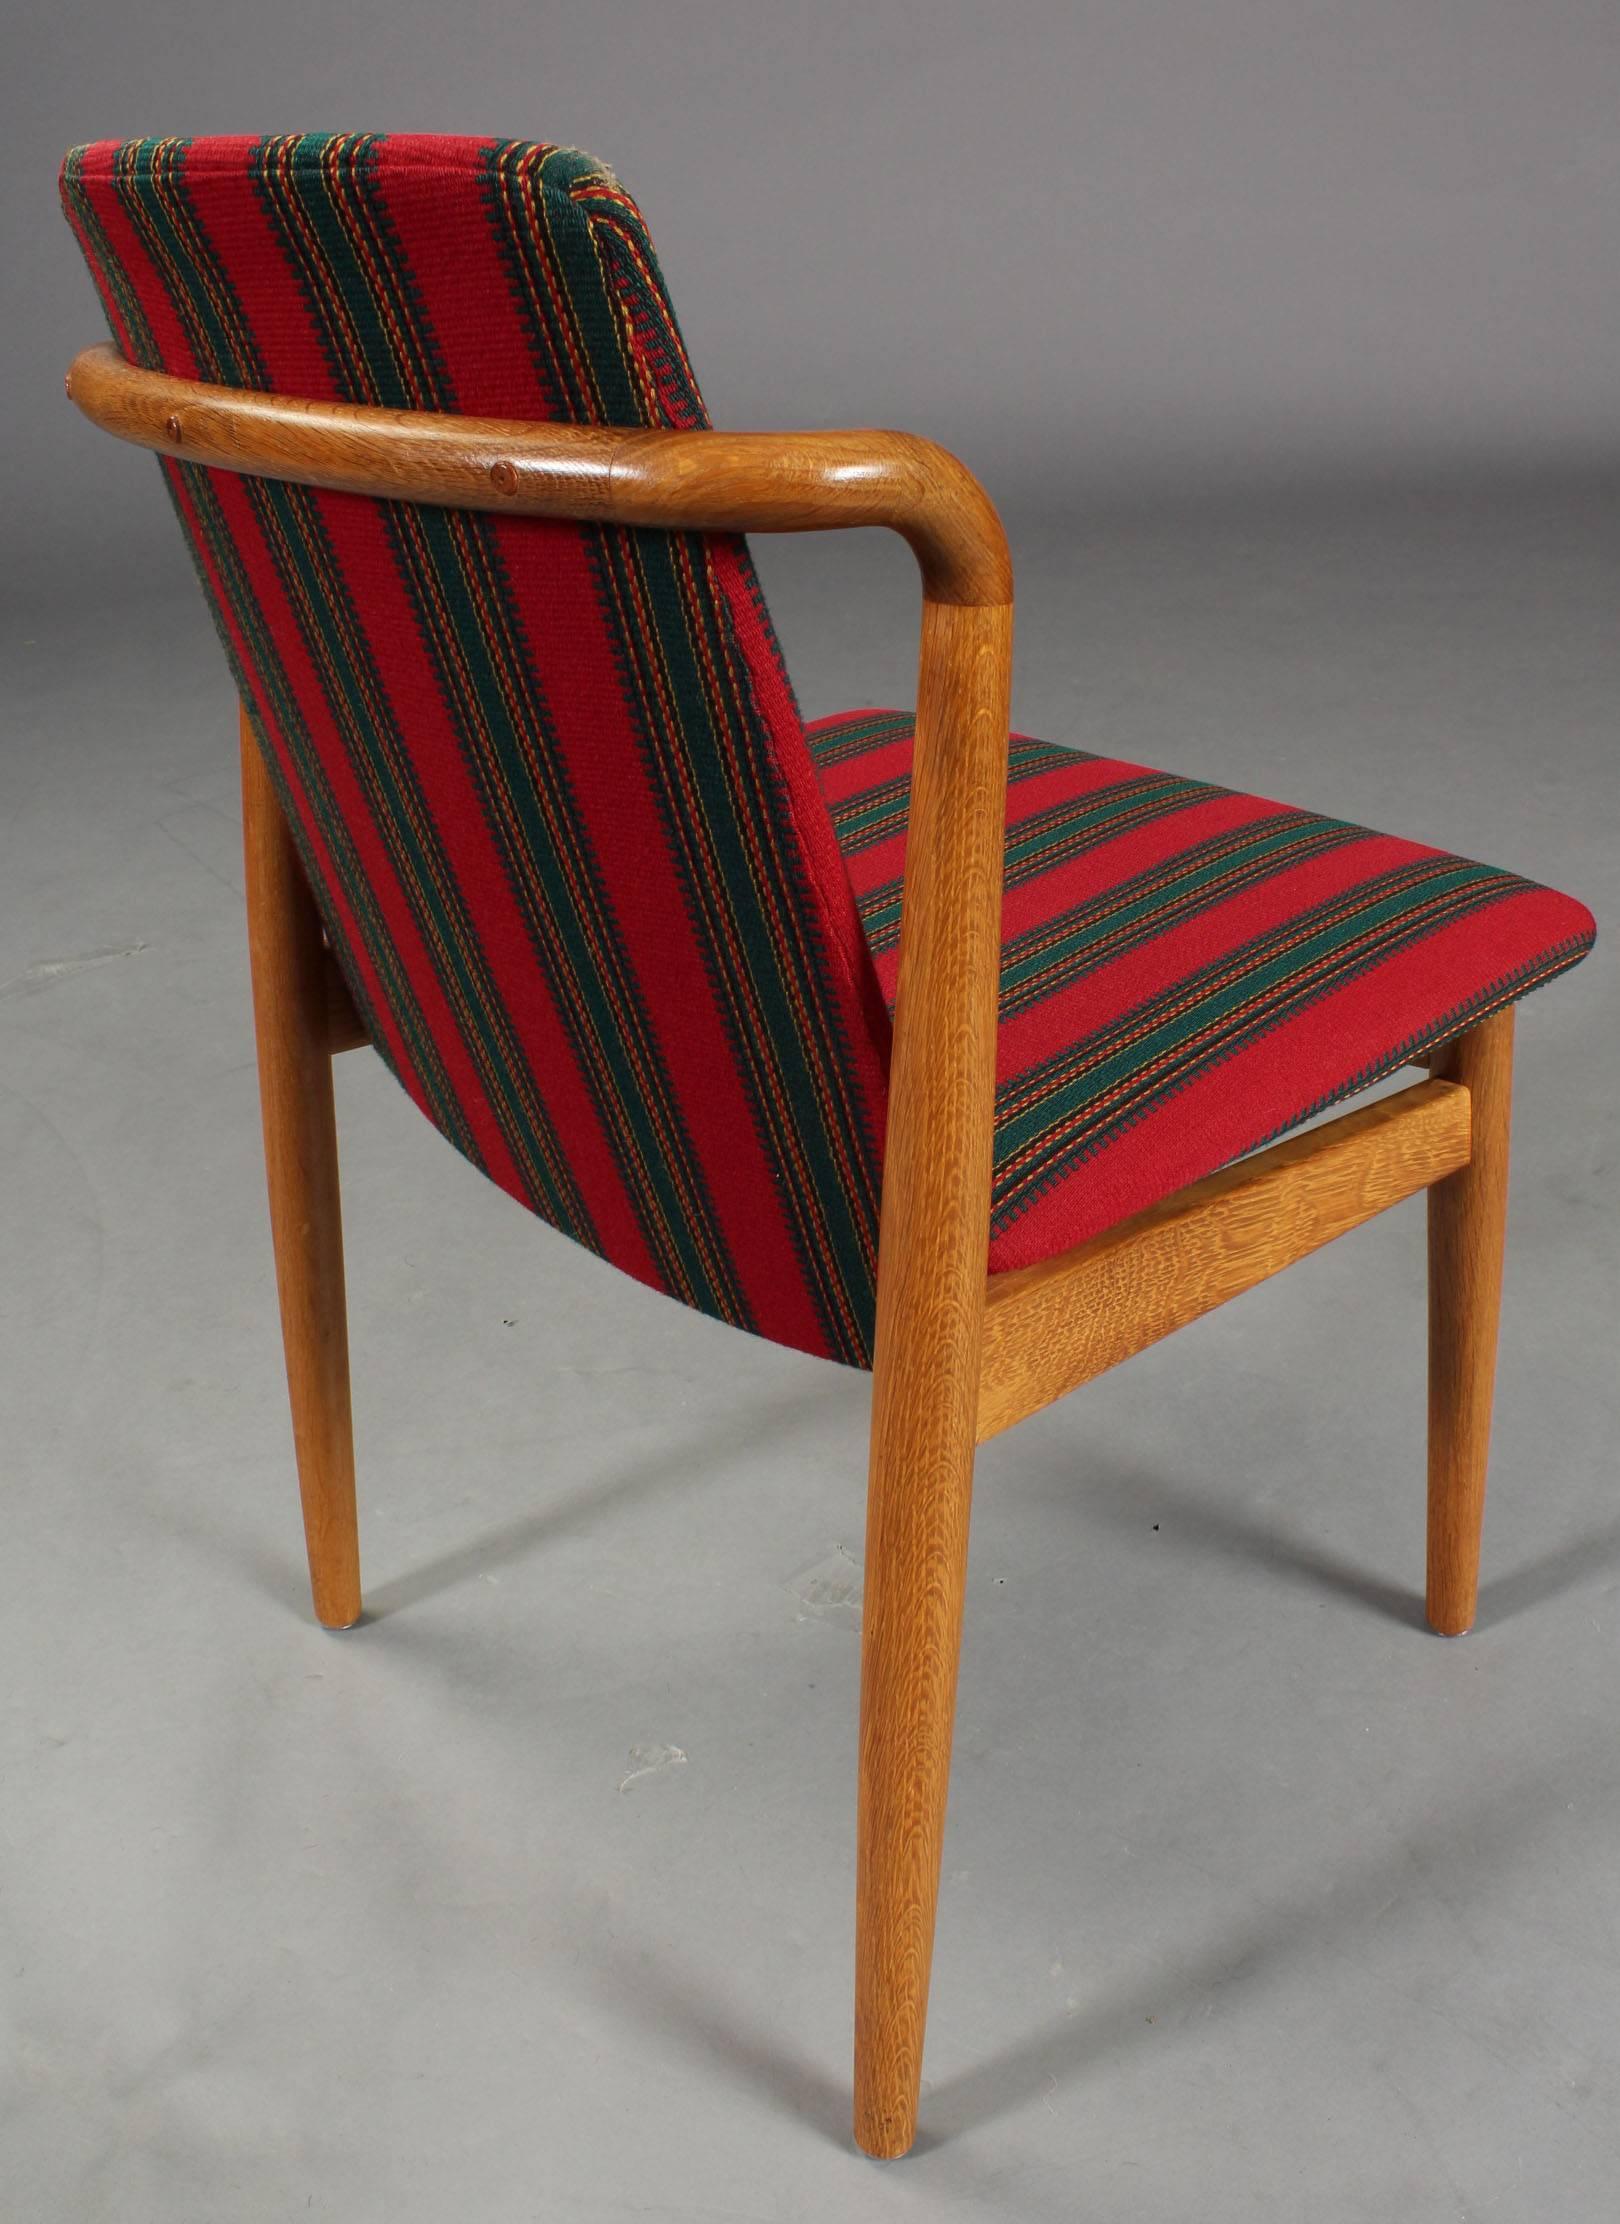 Hans Olsen, attributed. Dining chairs with frames of solid oak, seat and back upholstered with reddish striped upholstery fabric. Made in Denmark in the 1960s. Presumably manufactured by Bramin.
Perfect original condition.